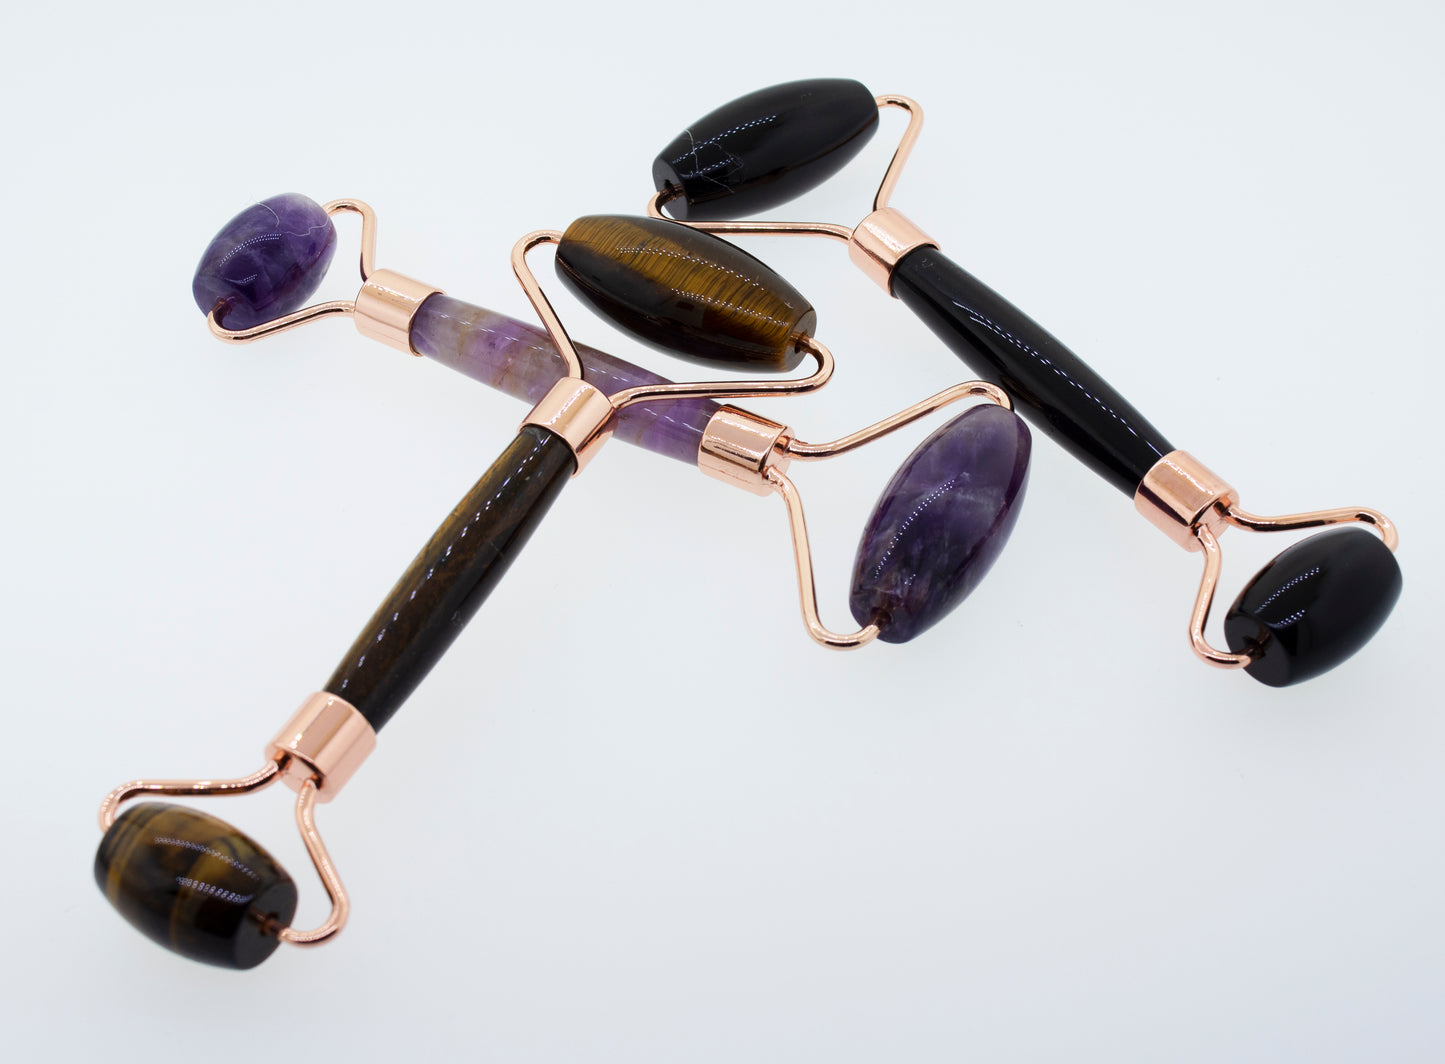 This description features Stone Face-rollers made of tiger eye, amethyst, and rose quartz stones. Incorporating the keywords "face roller" and "stone," it highlights these tools as part of a self-care.